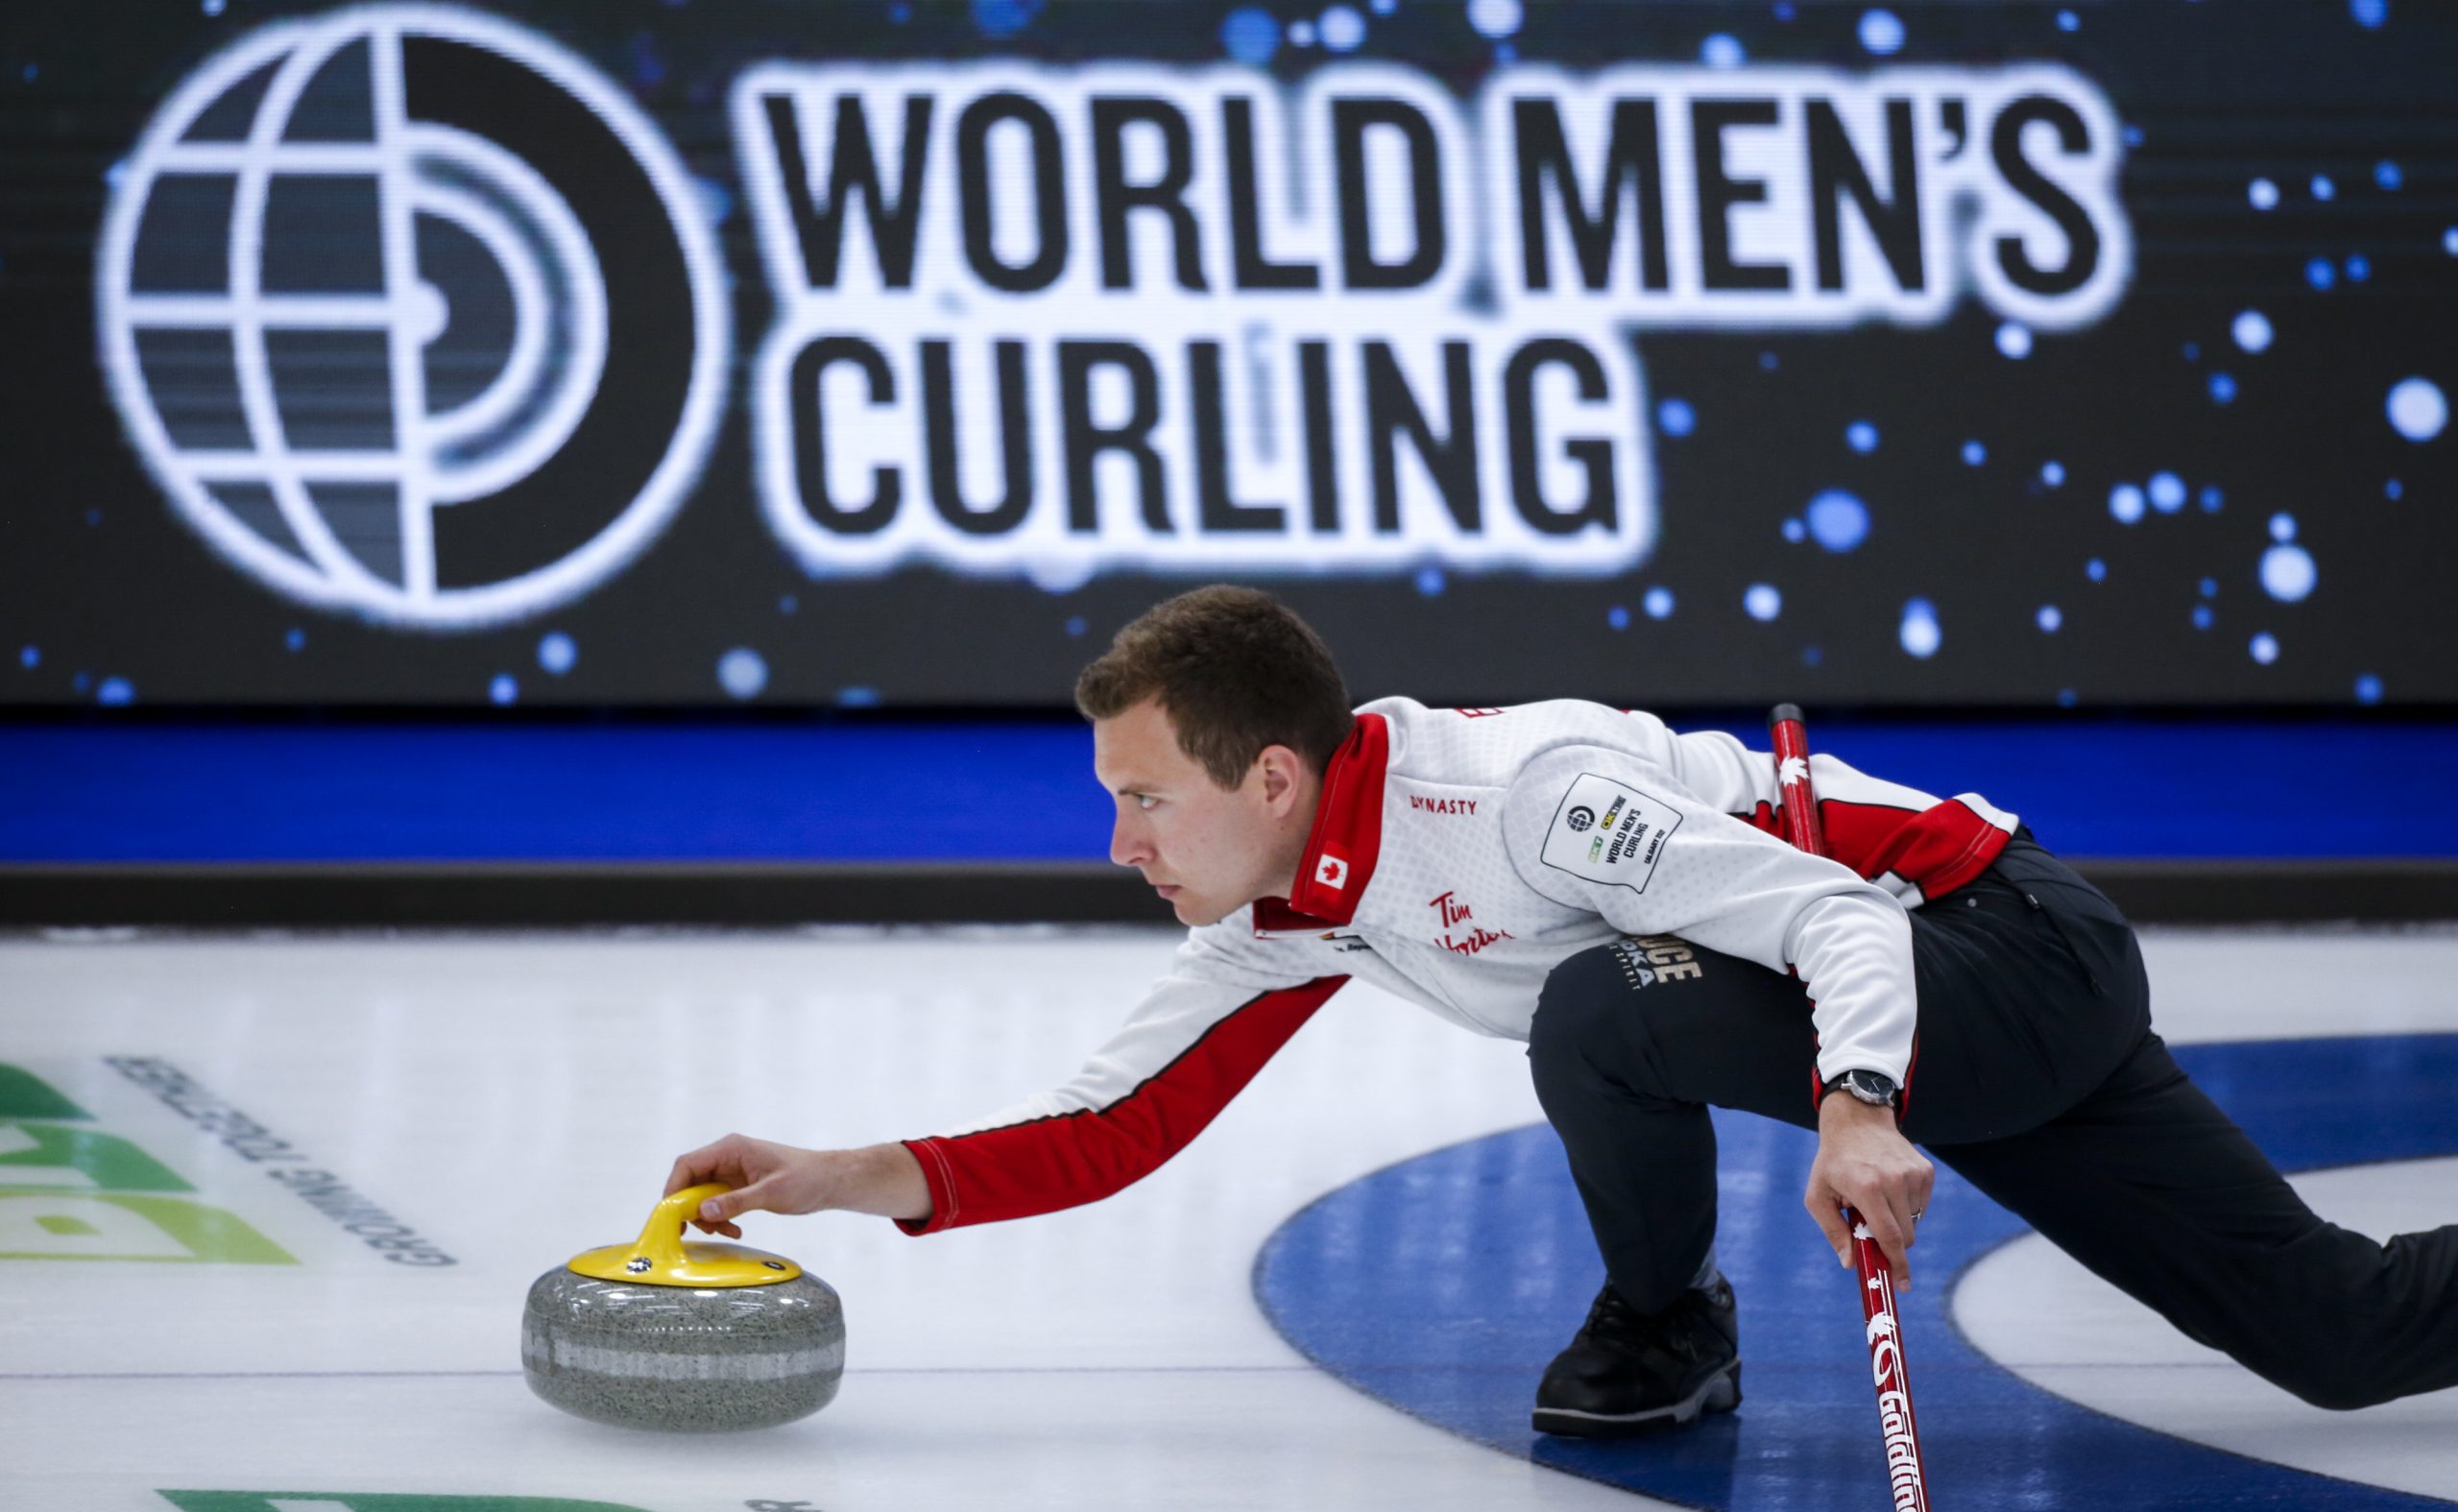 World men's curling championship playoffs on hold due to COVID19 CityNews Toronto